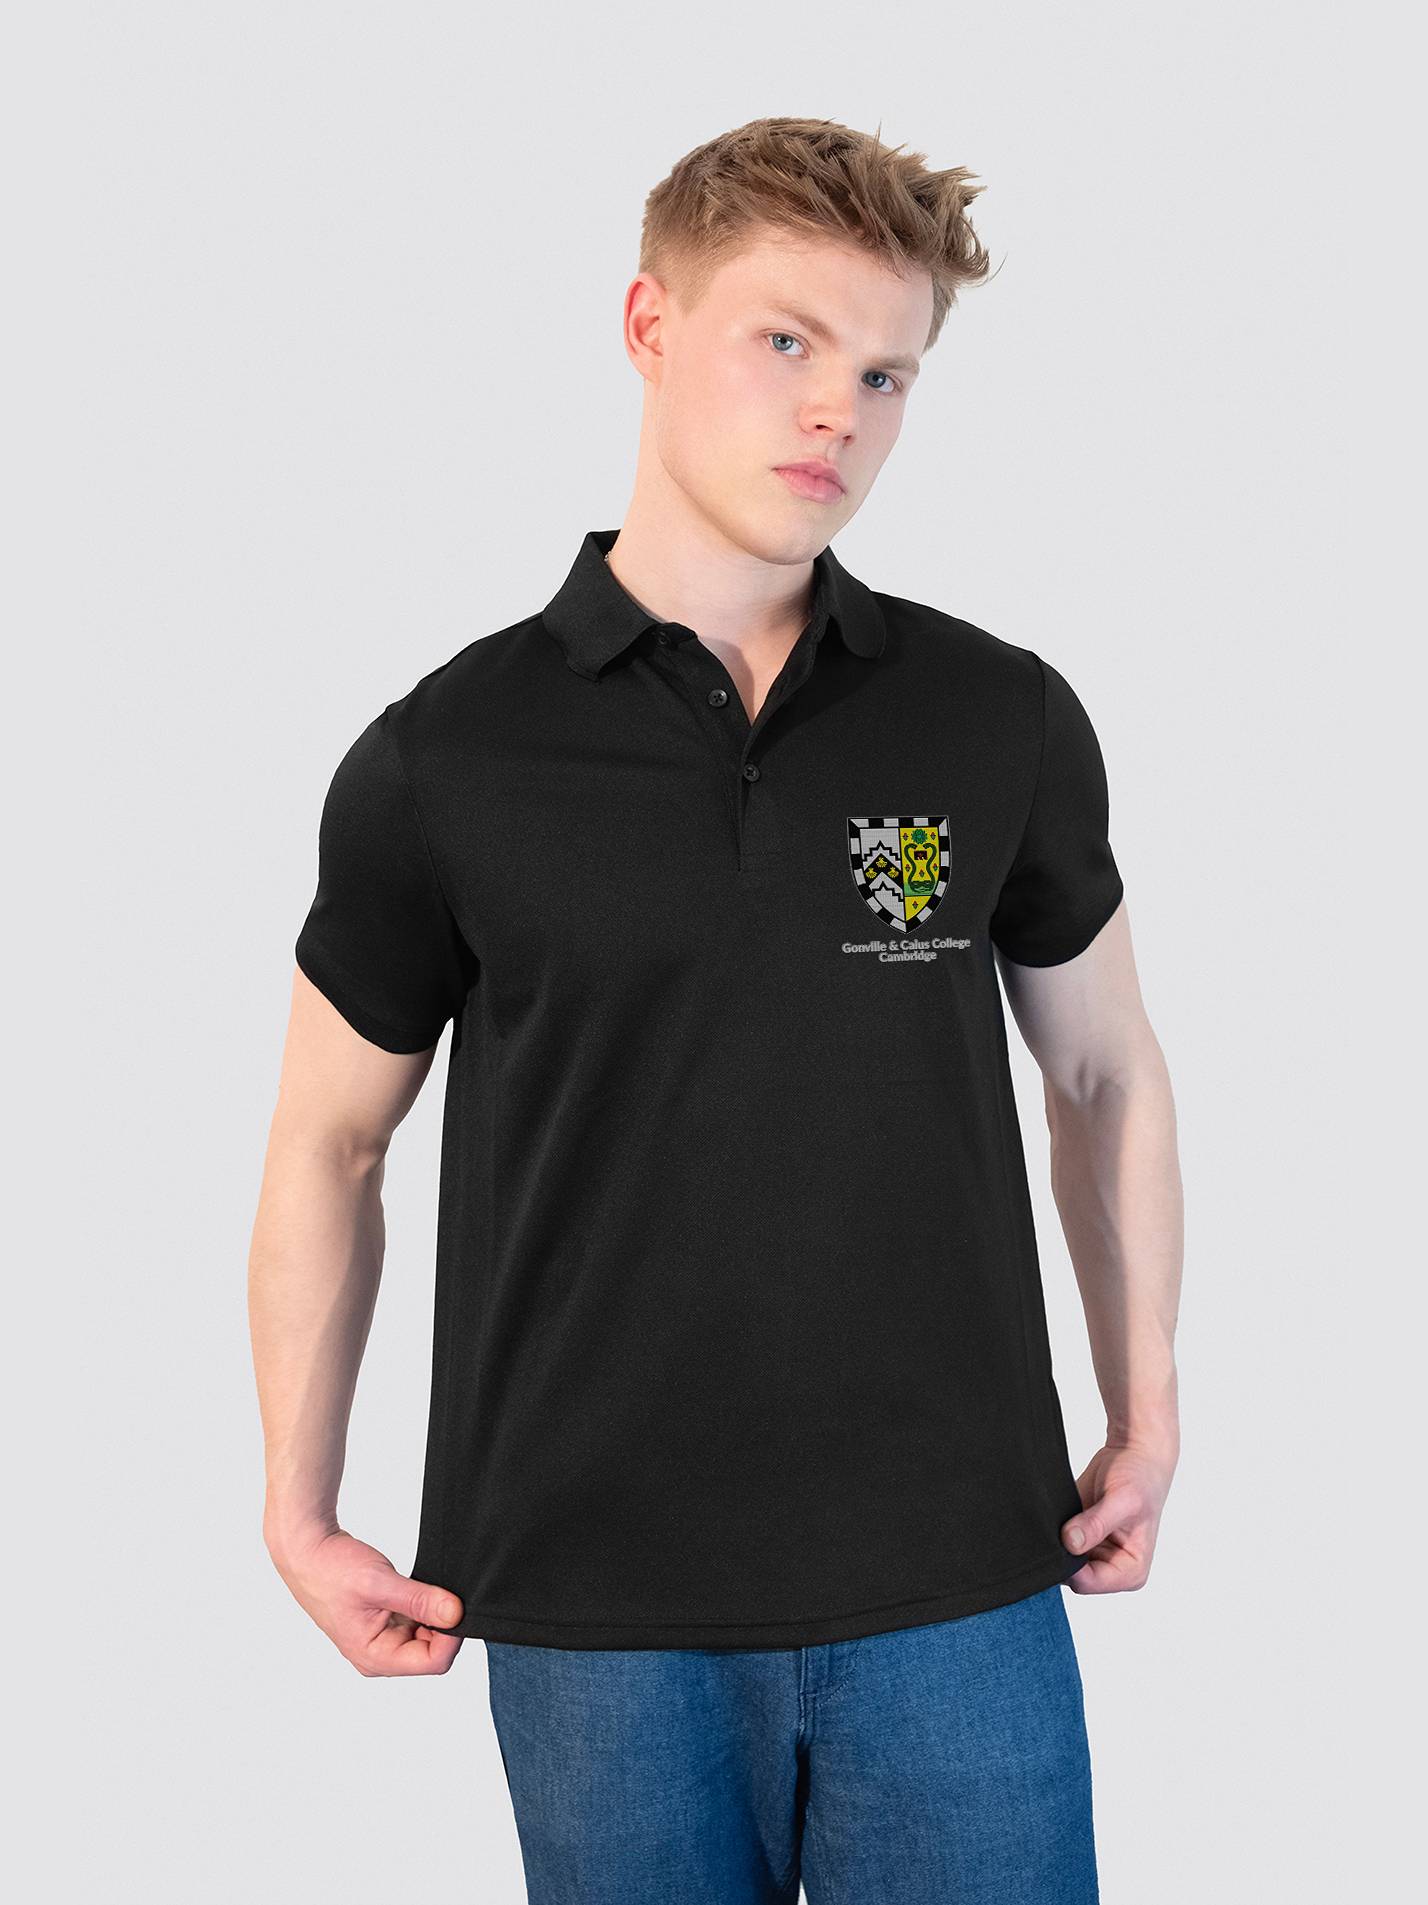 Gonville & Caius College Cambridge Sustainable Men's Polo Shirt